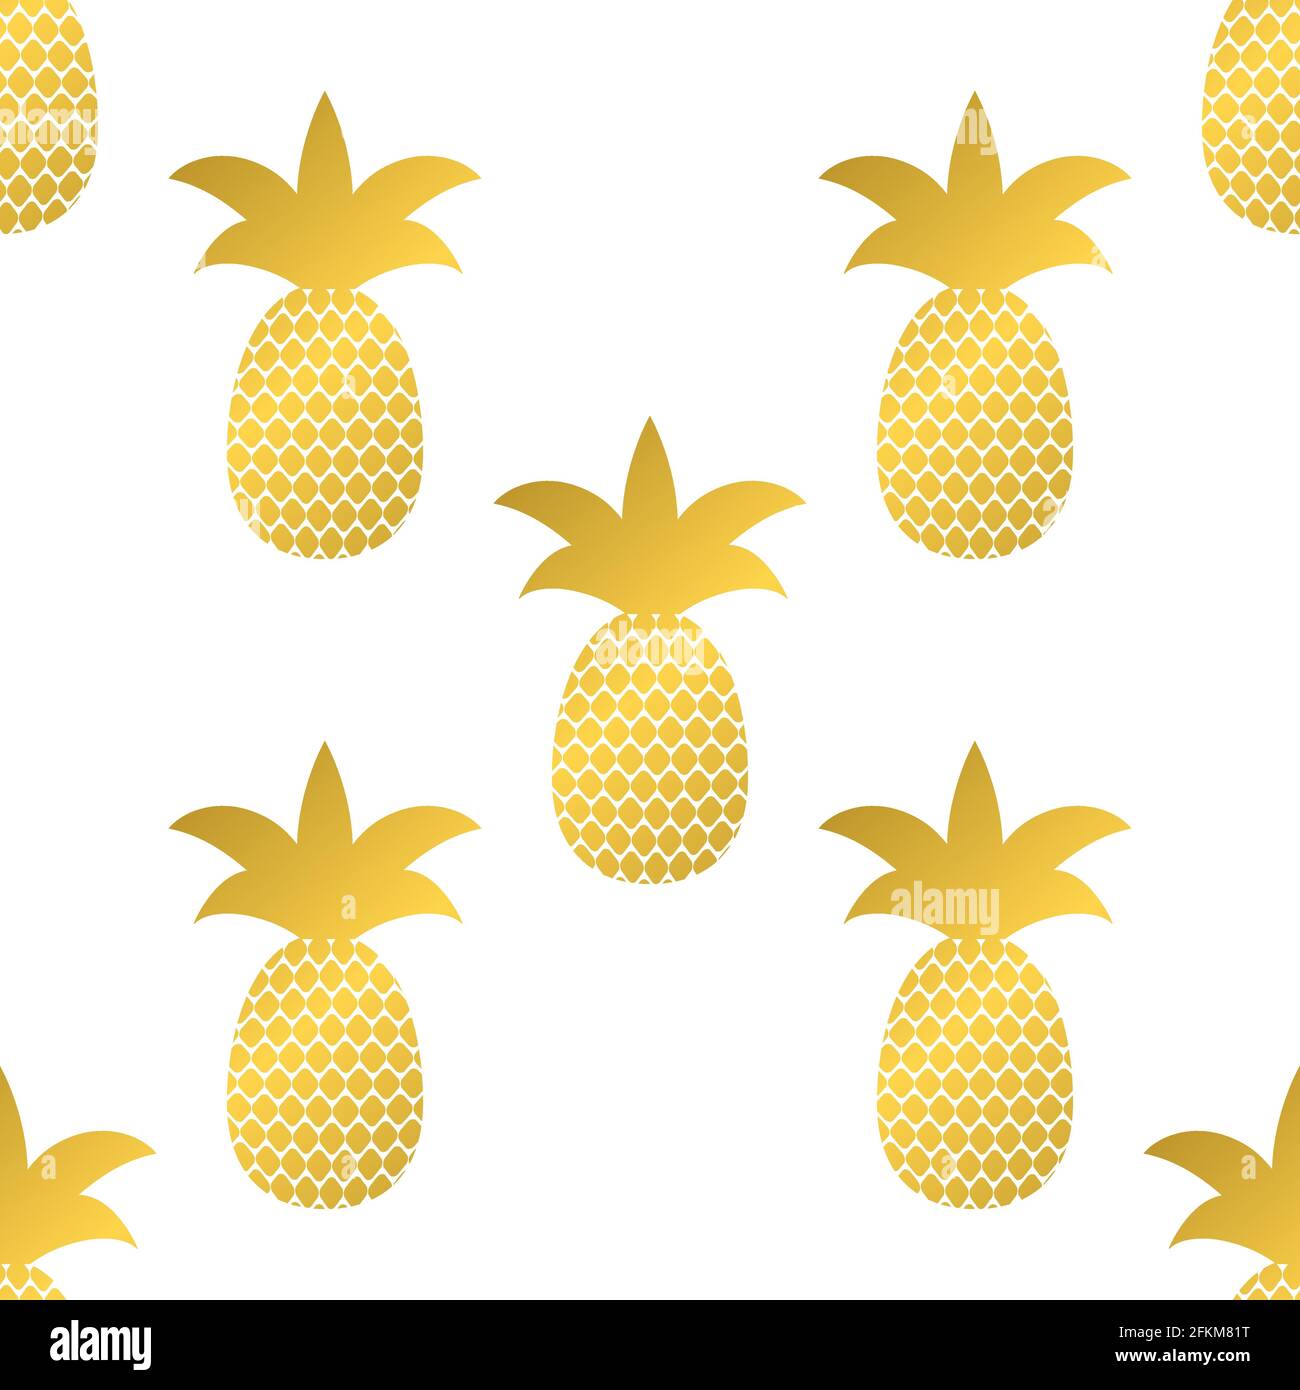 Beach summer seamless pattern with pineapple. Cute tropical yellow pineapple  on blue background. Fabric textile summer vibes design. Hawaii exotic  print. Vector illustration. Pineapple wallpaper. 22913992 Vector Art at  Vecteezy